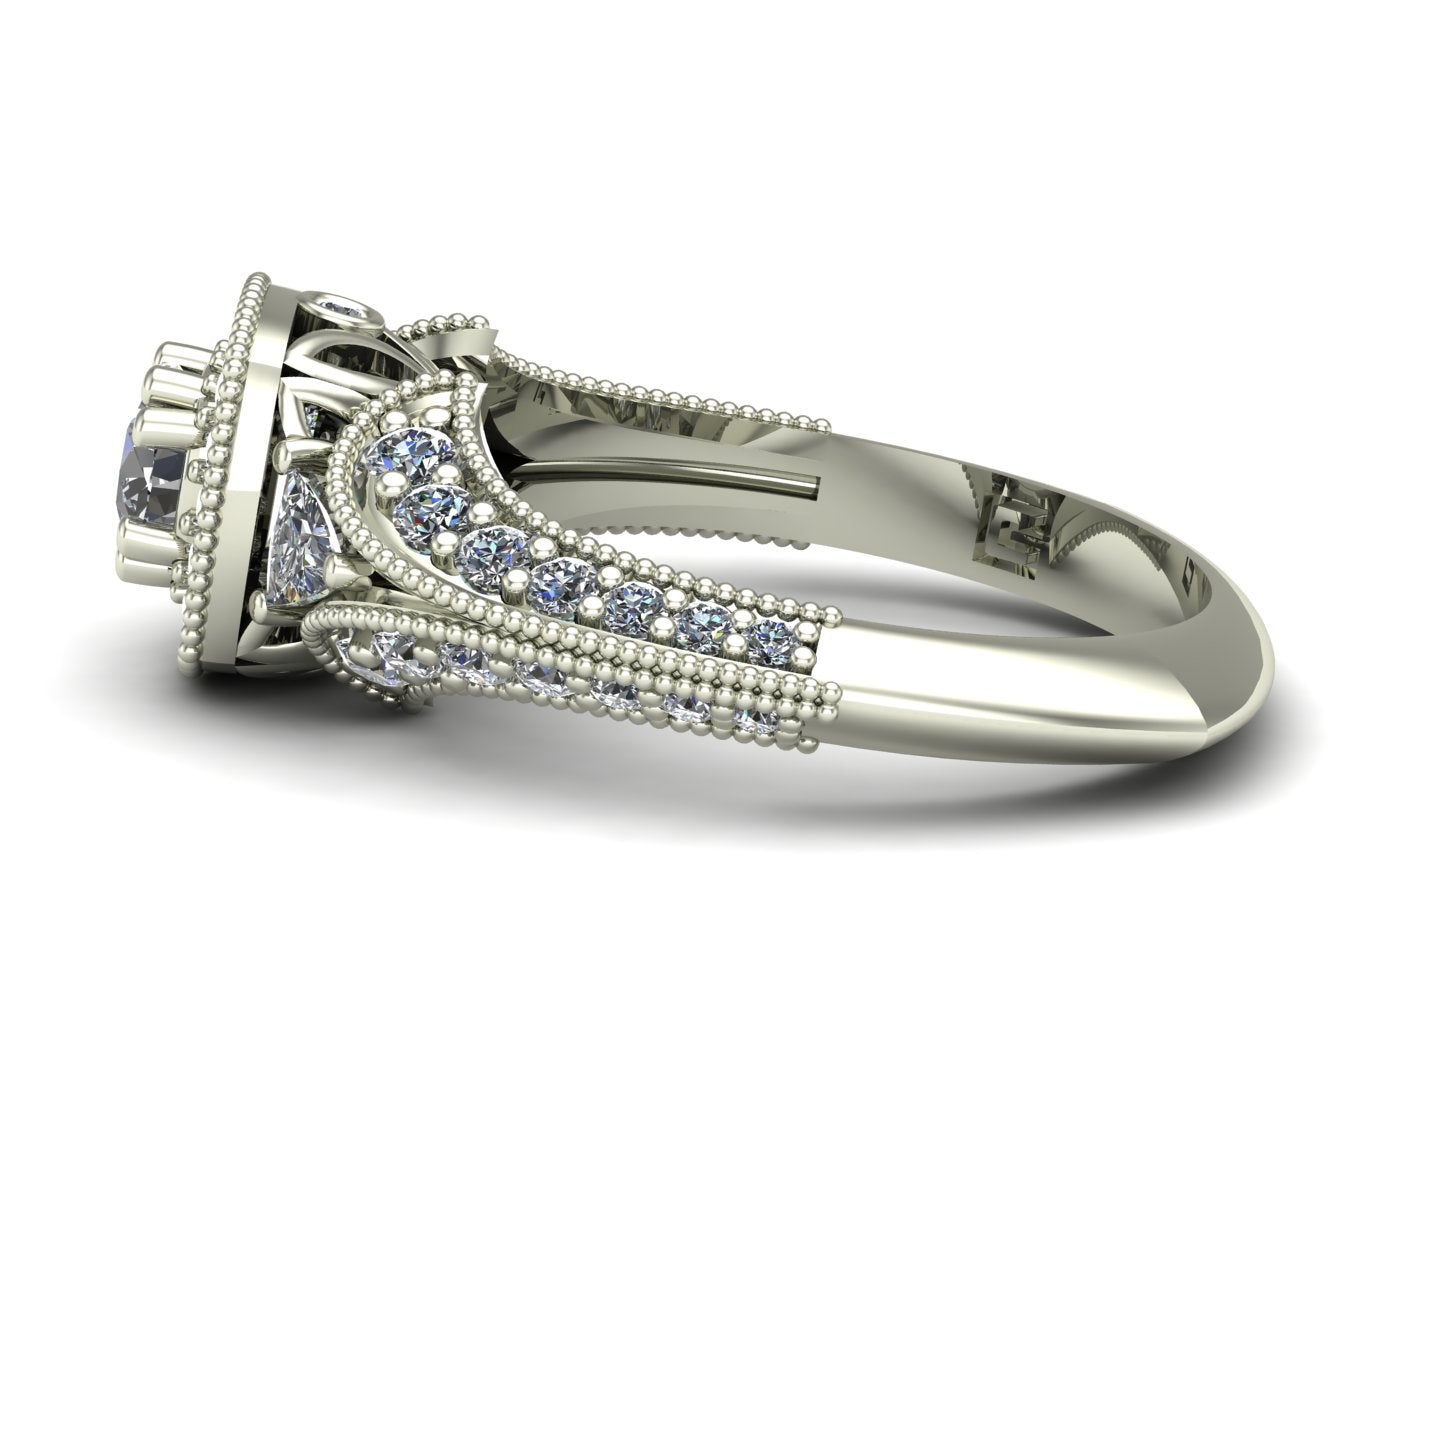 diamond halo engagement ring with trillions and split shank in 14k white gold - Charles Babb Designs - side view